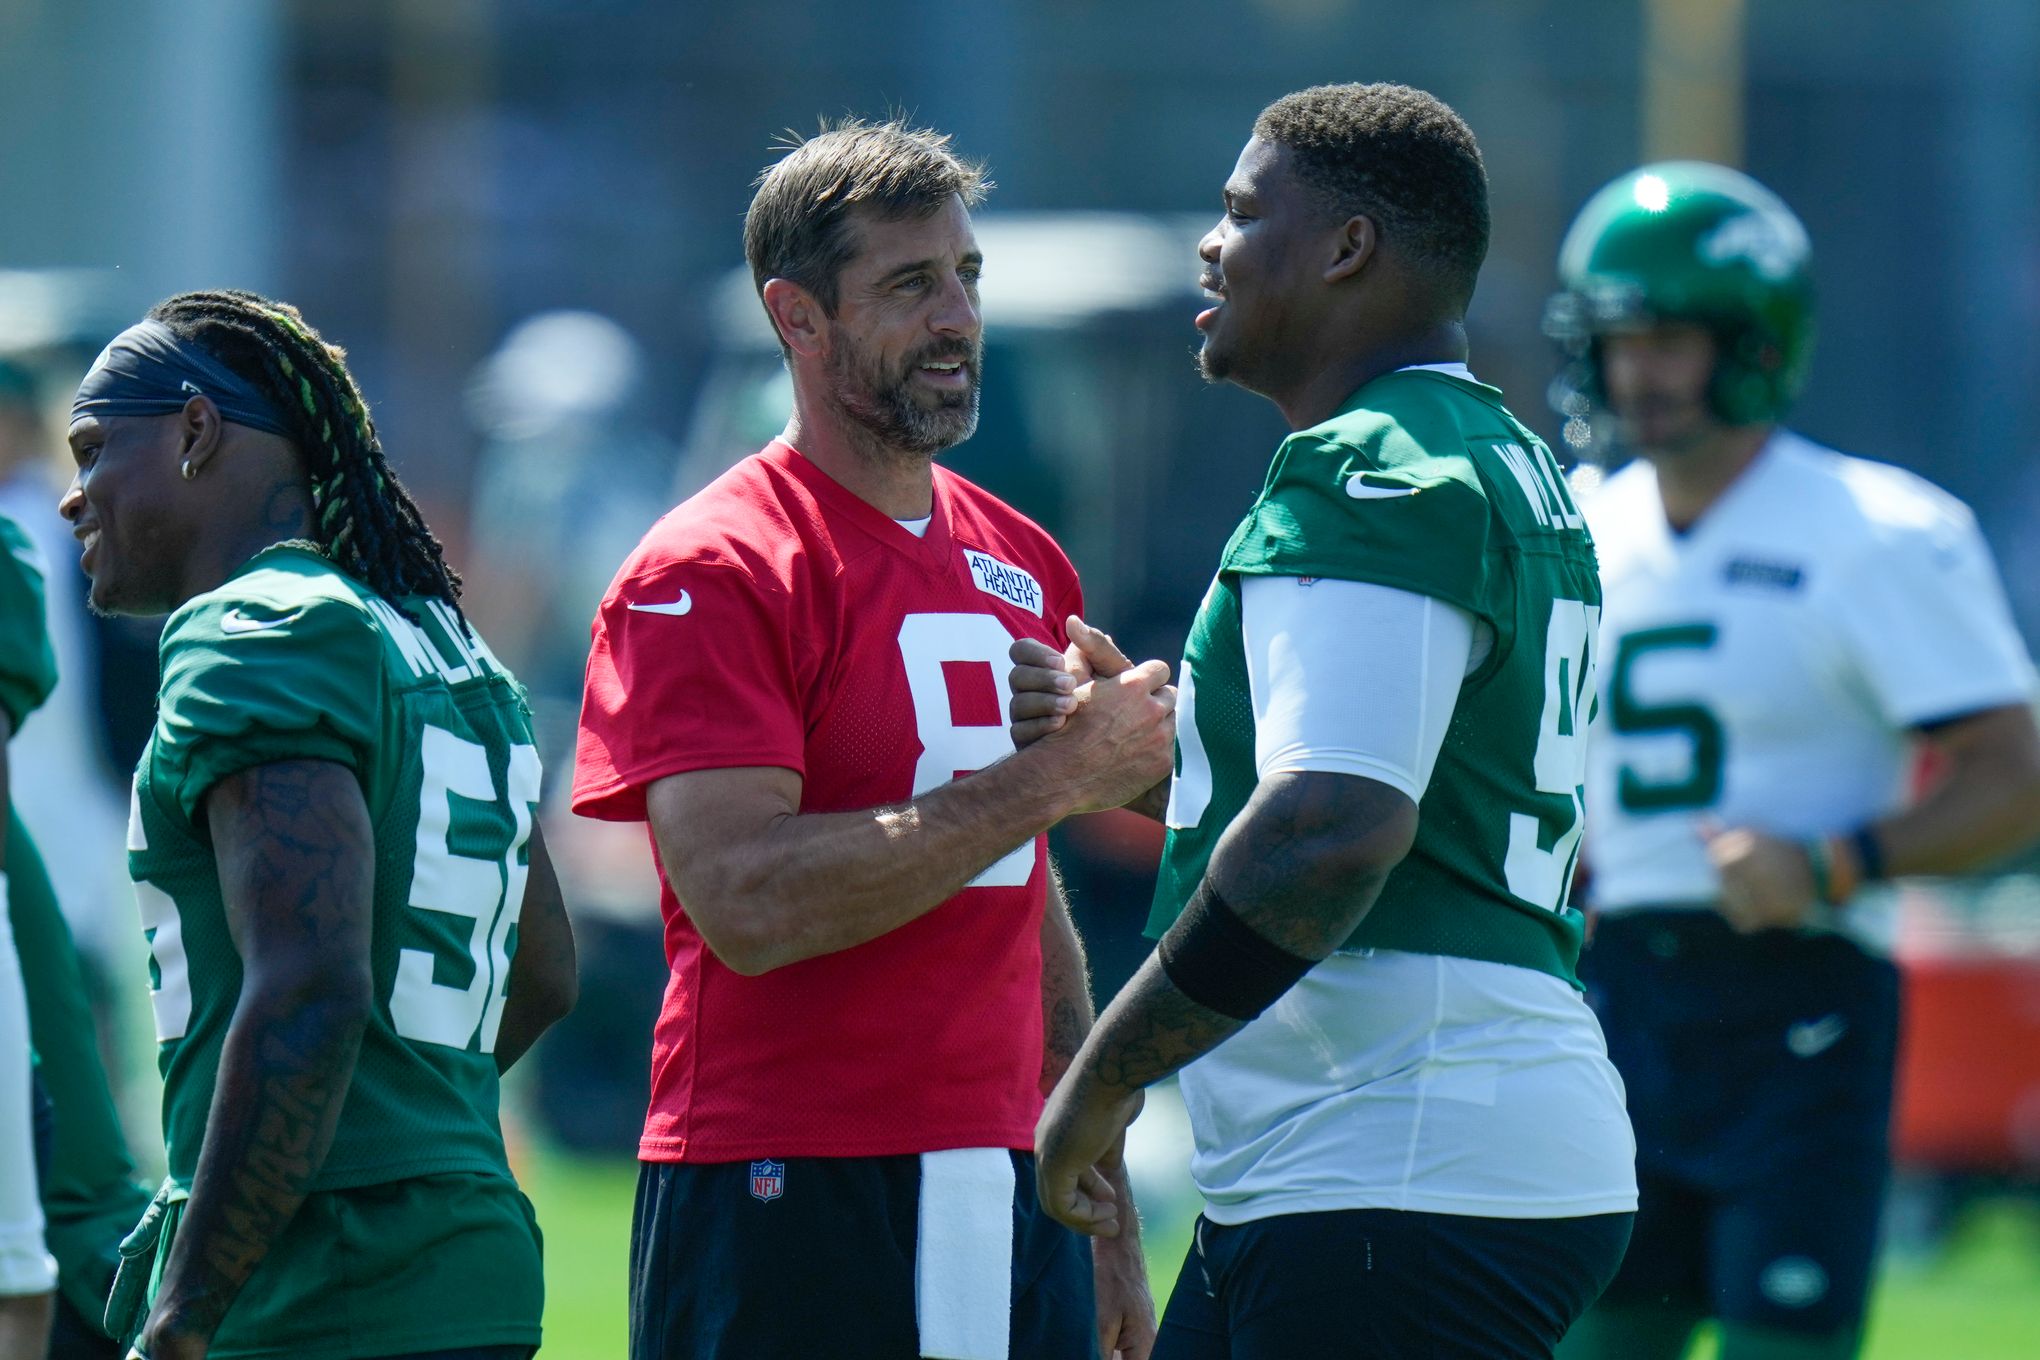 For Aaron Rodgers, this Jets season is a chance to prove his greatness